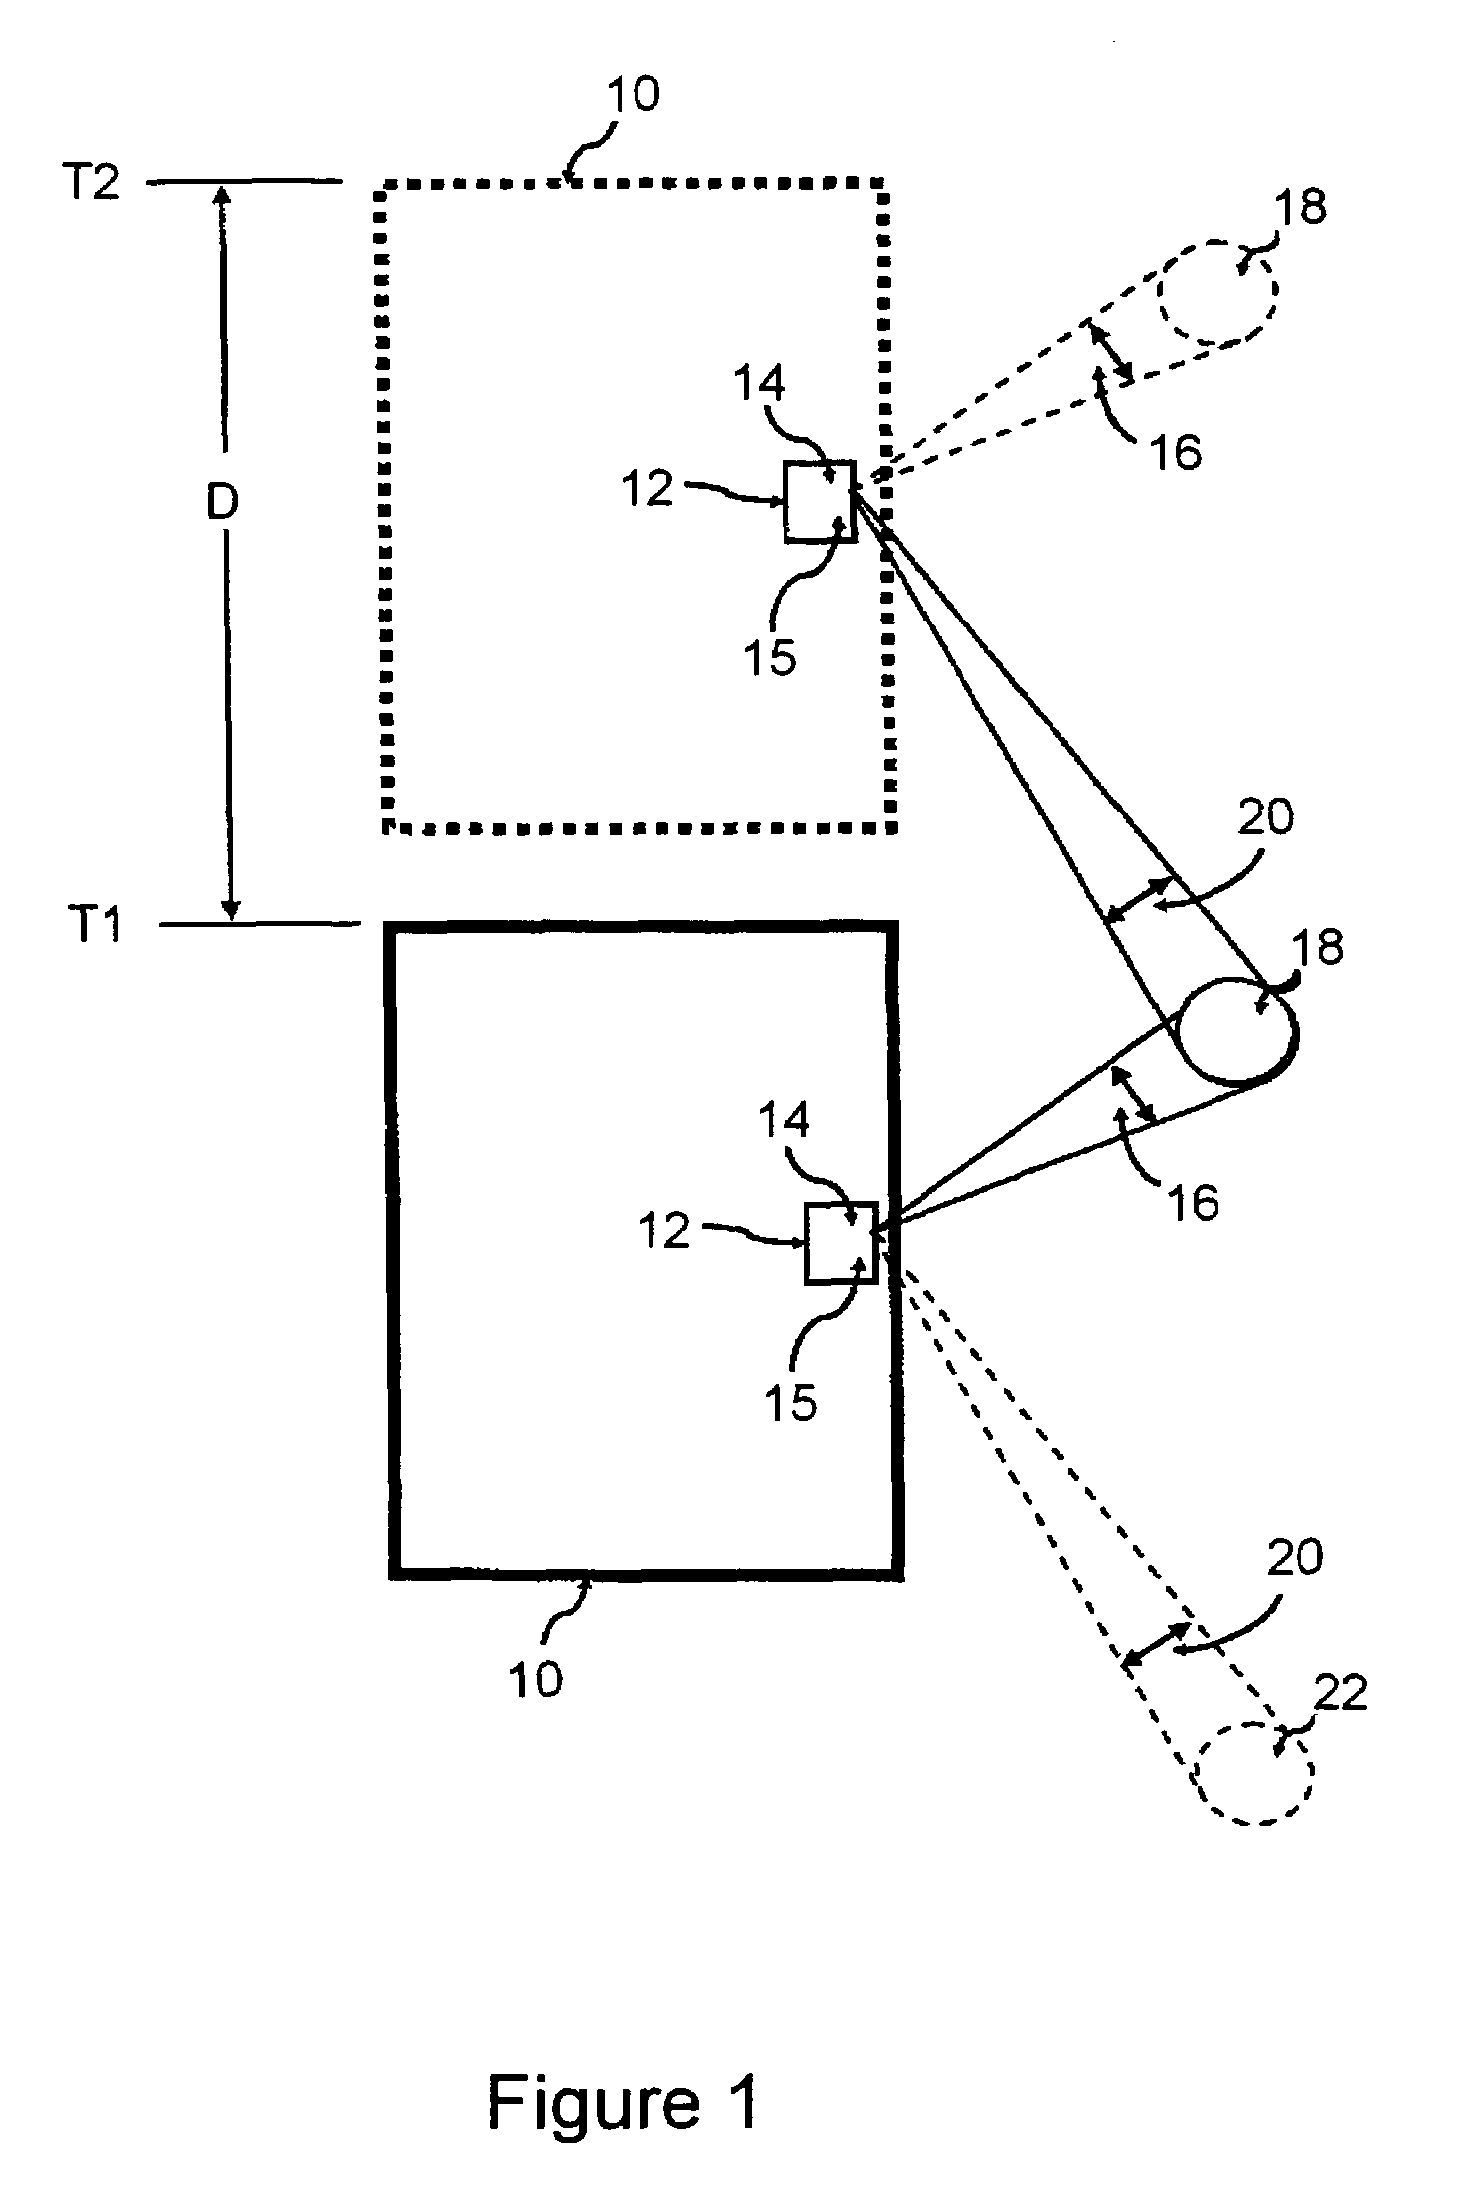 Method of distinguishing, from a moving platform, stationary objects from moving objects